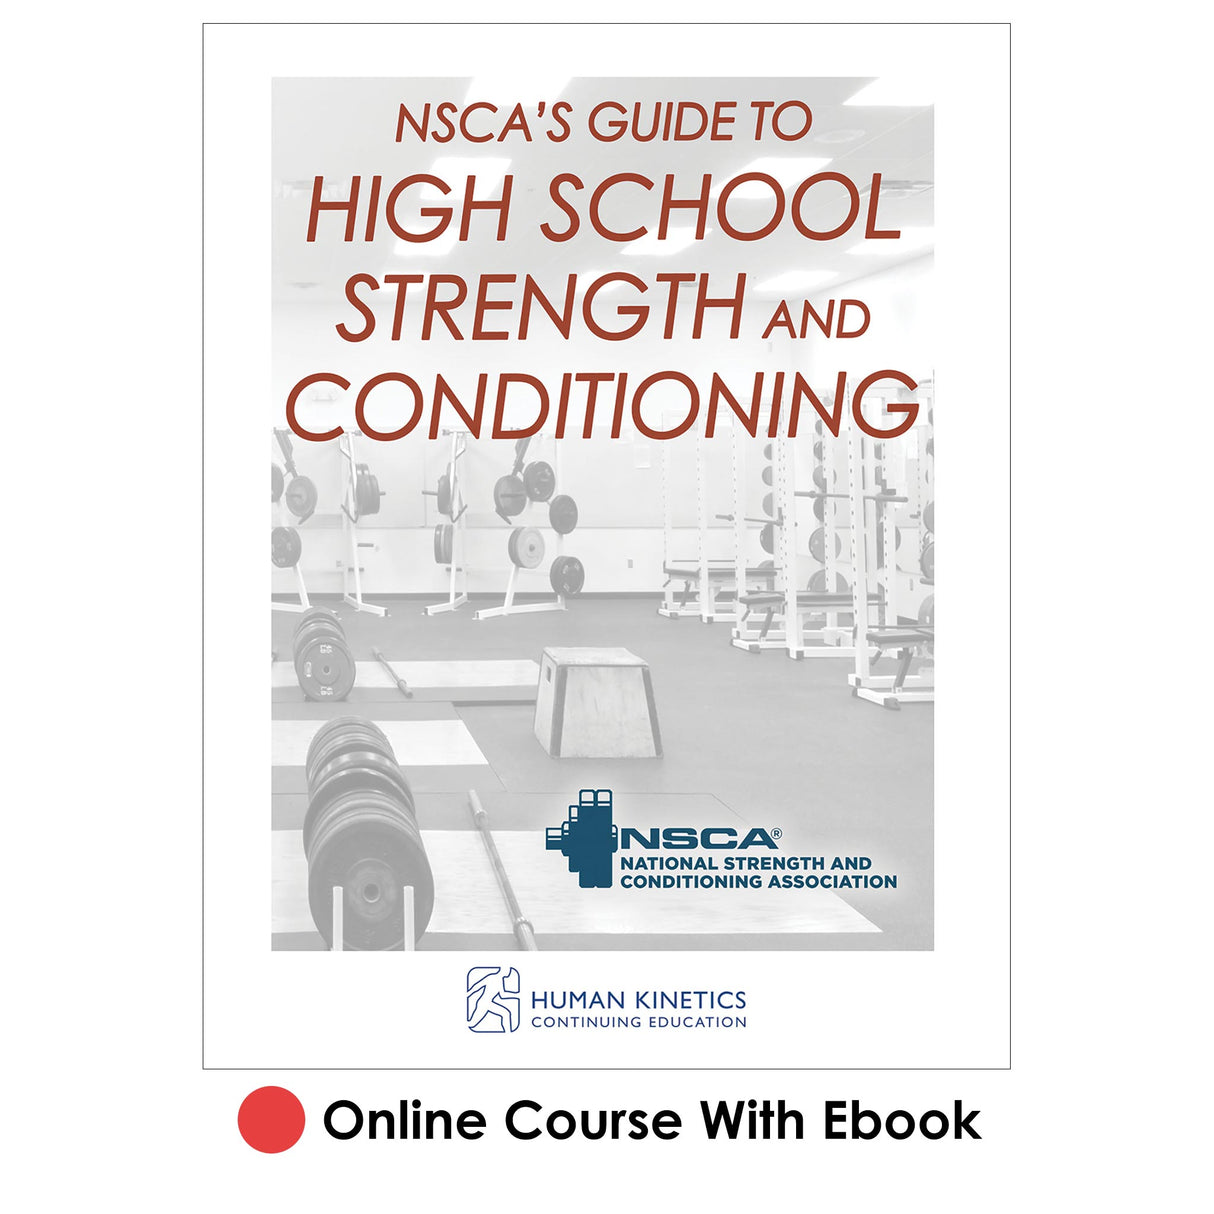 NSCA's Guide to High School Strength and Conditioning Online CE Course With Ebook